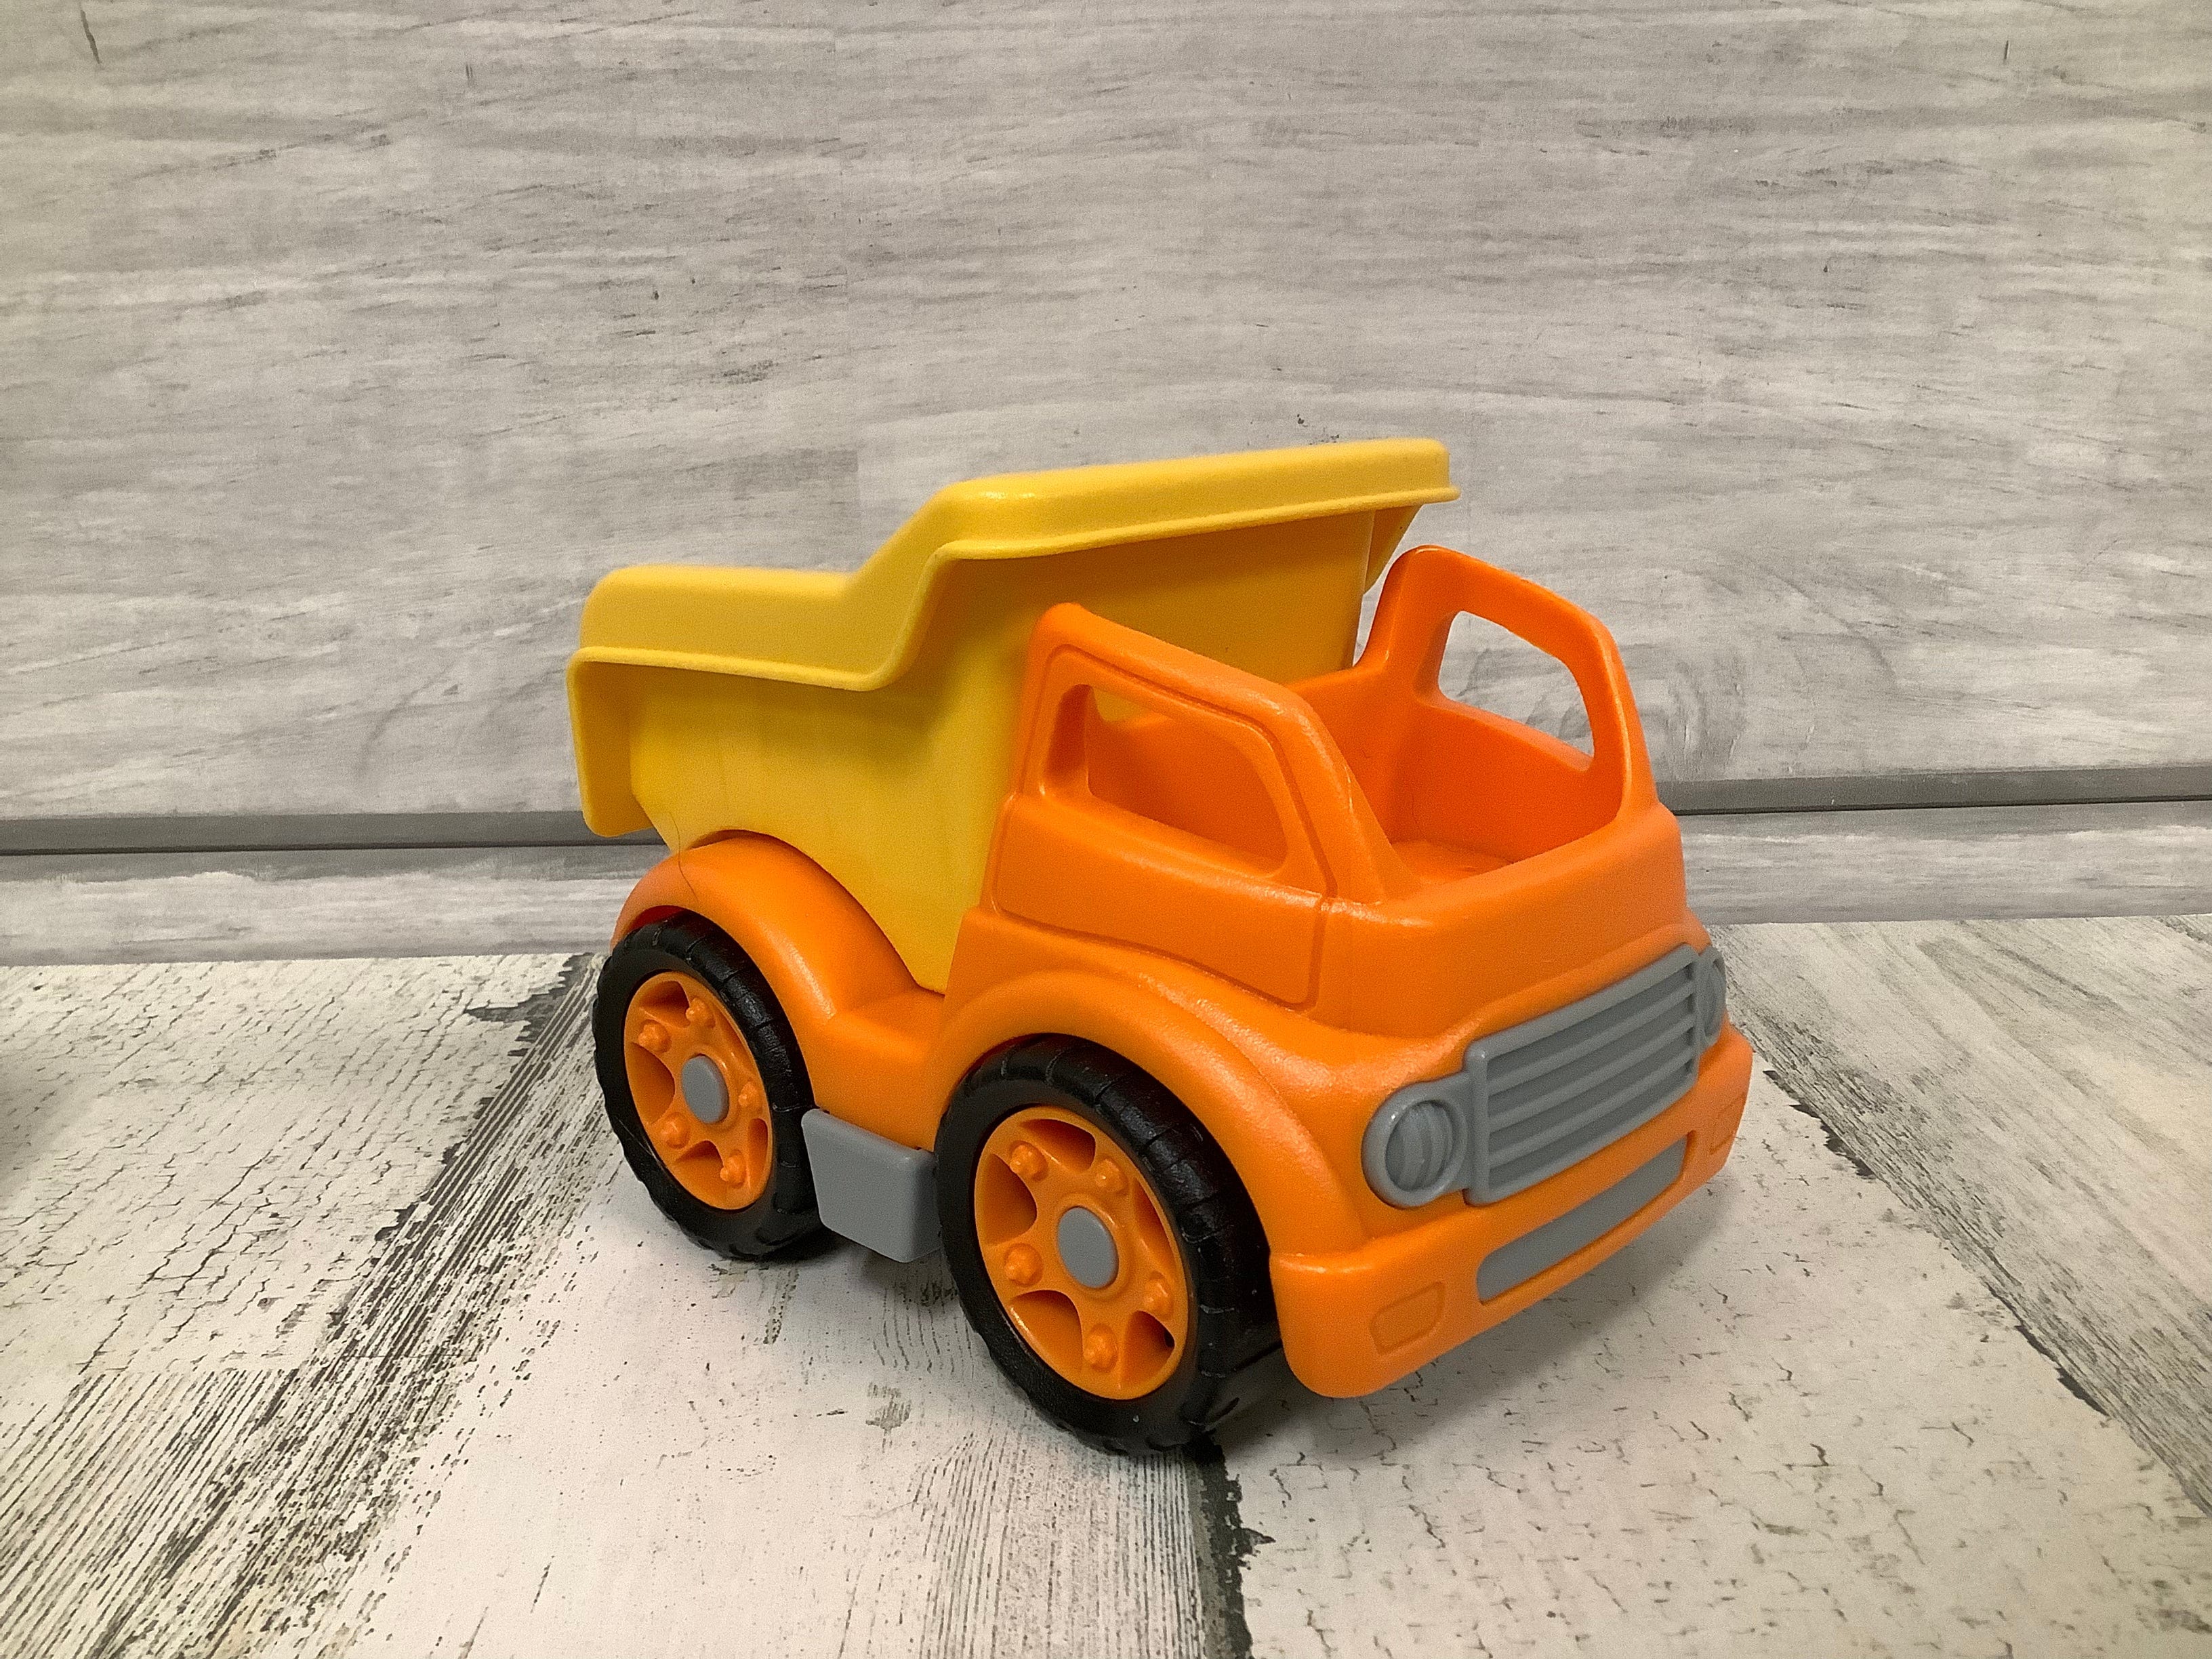 Minnows Childhood Goods Fisher Price, Little People Construction Trucks *In Store Pick Up*